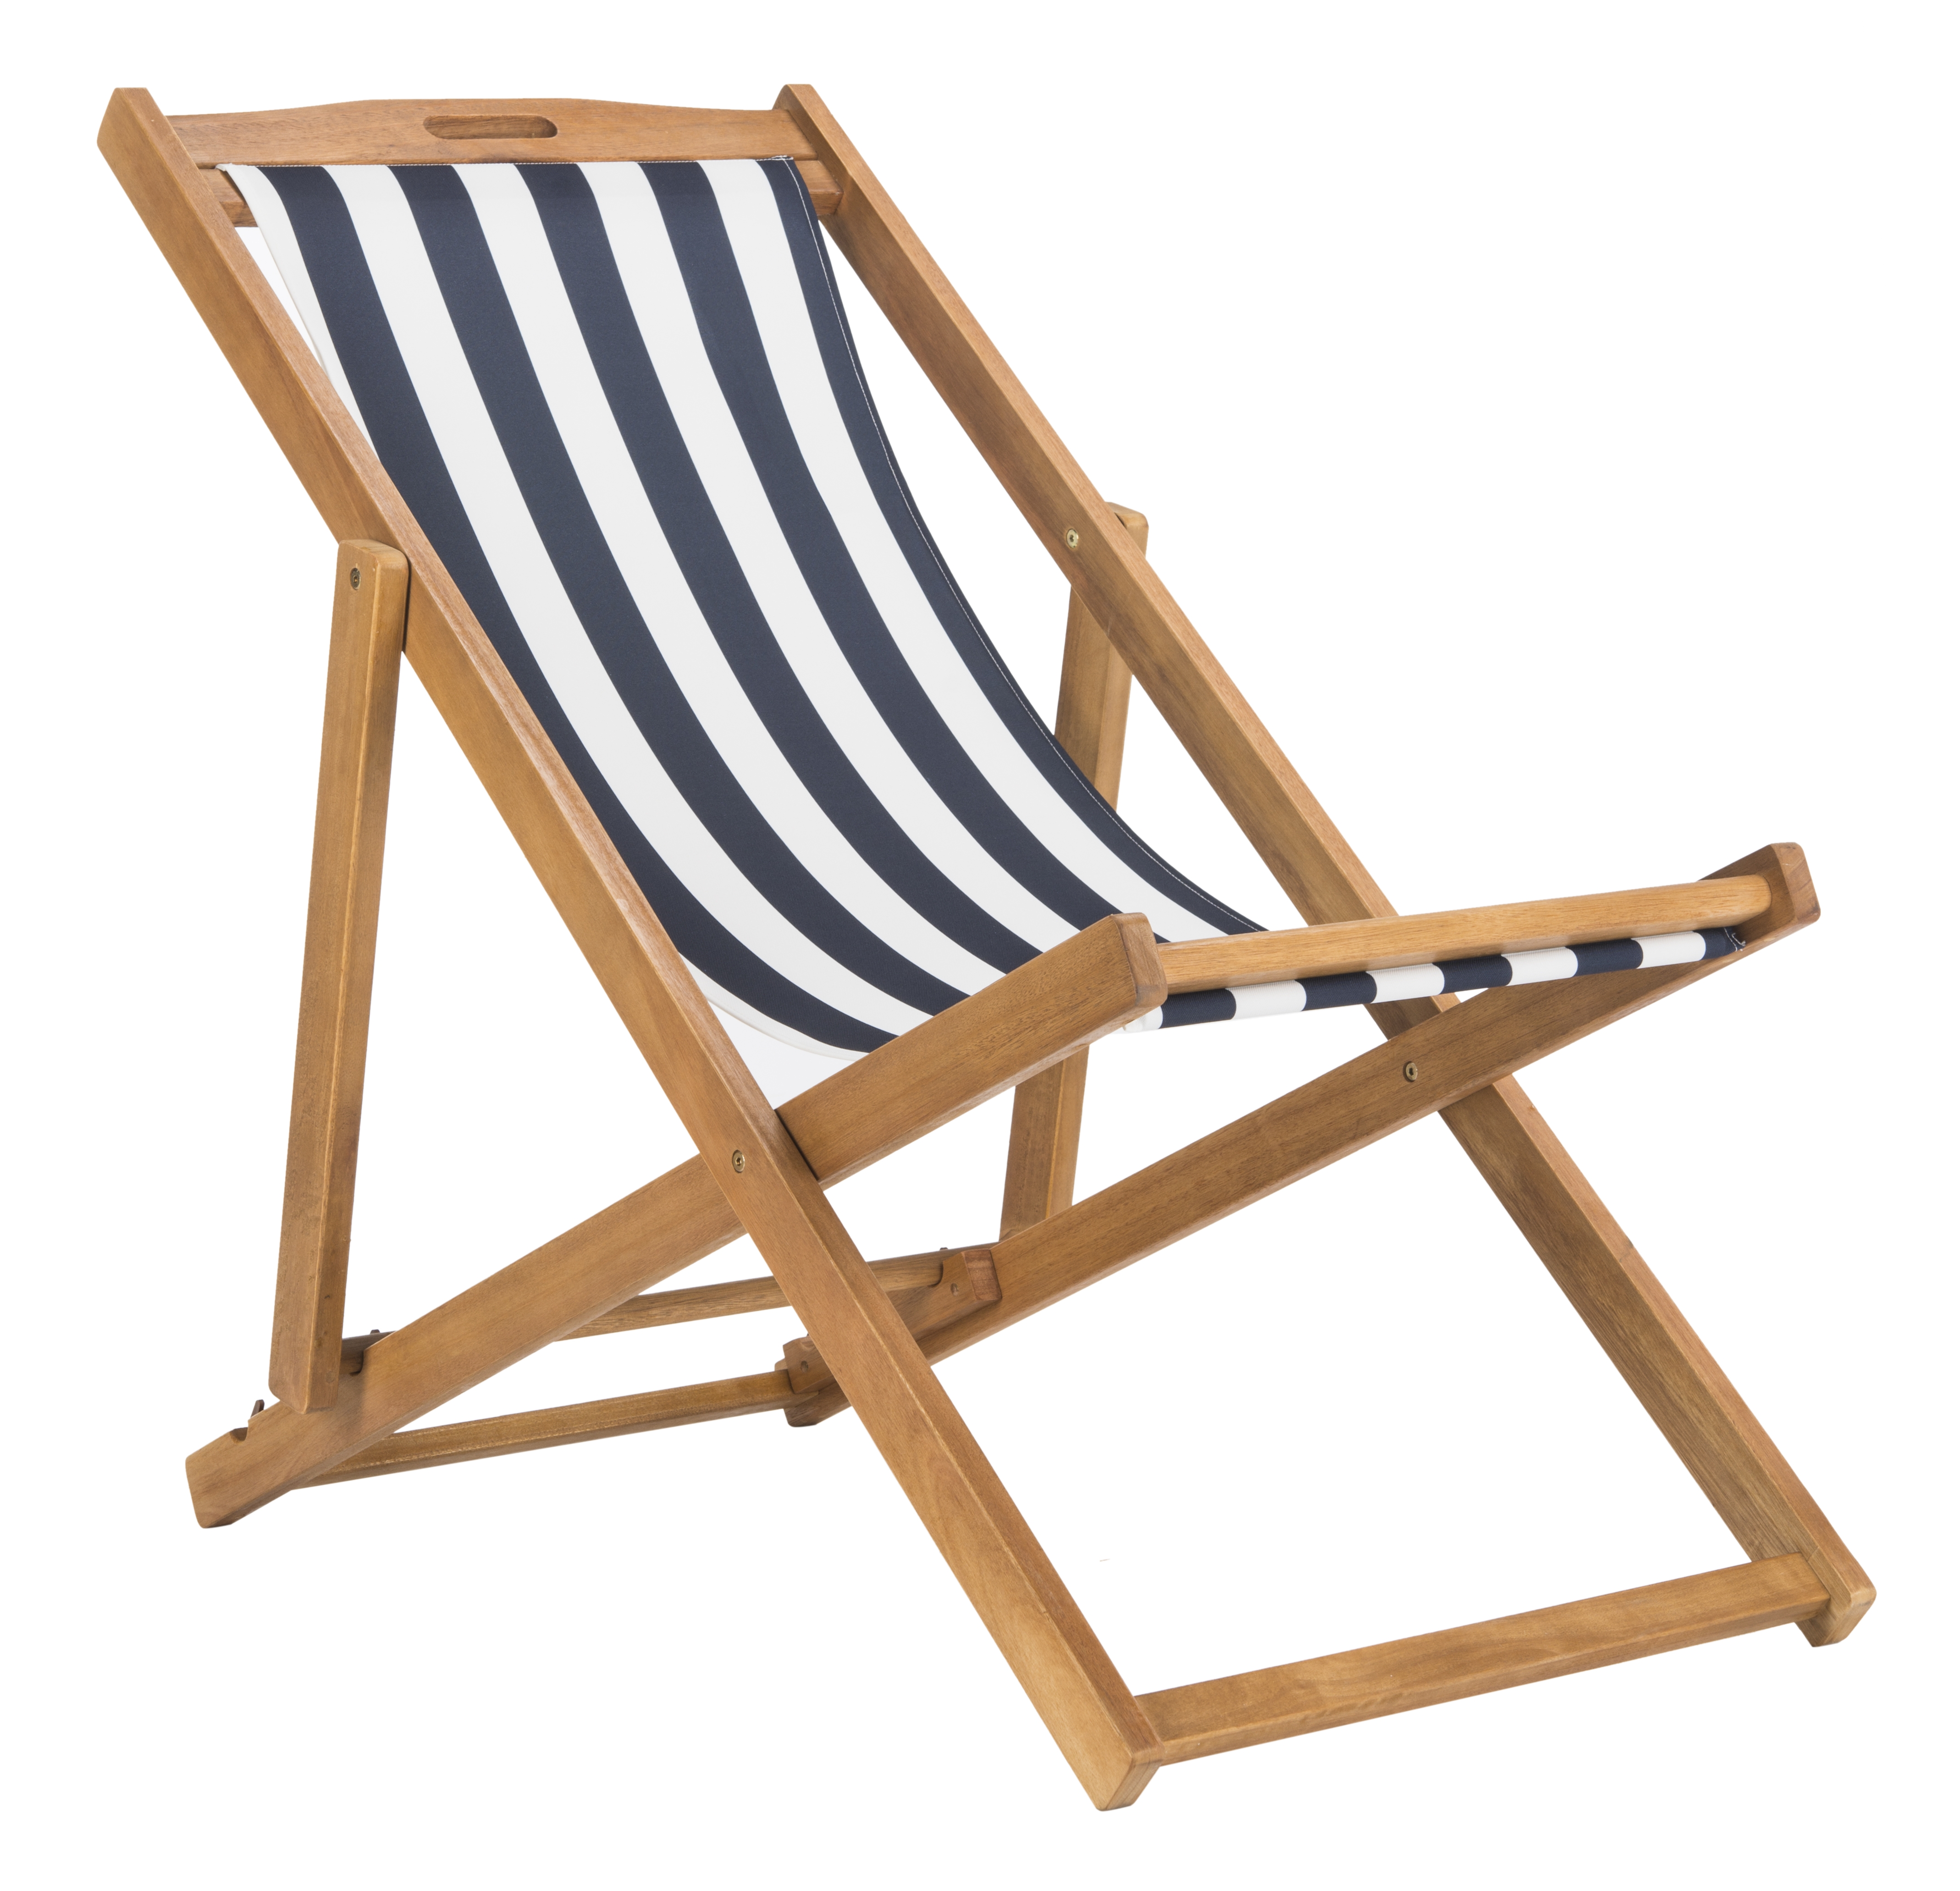 Loren Foldable Sling Chair - Natural/Navy/White - Arlo Home - Image 2